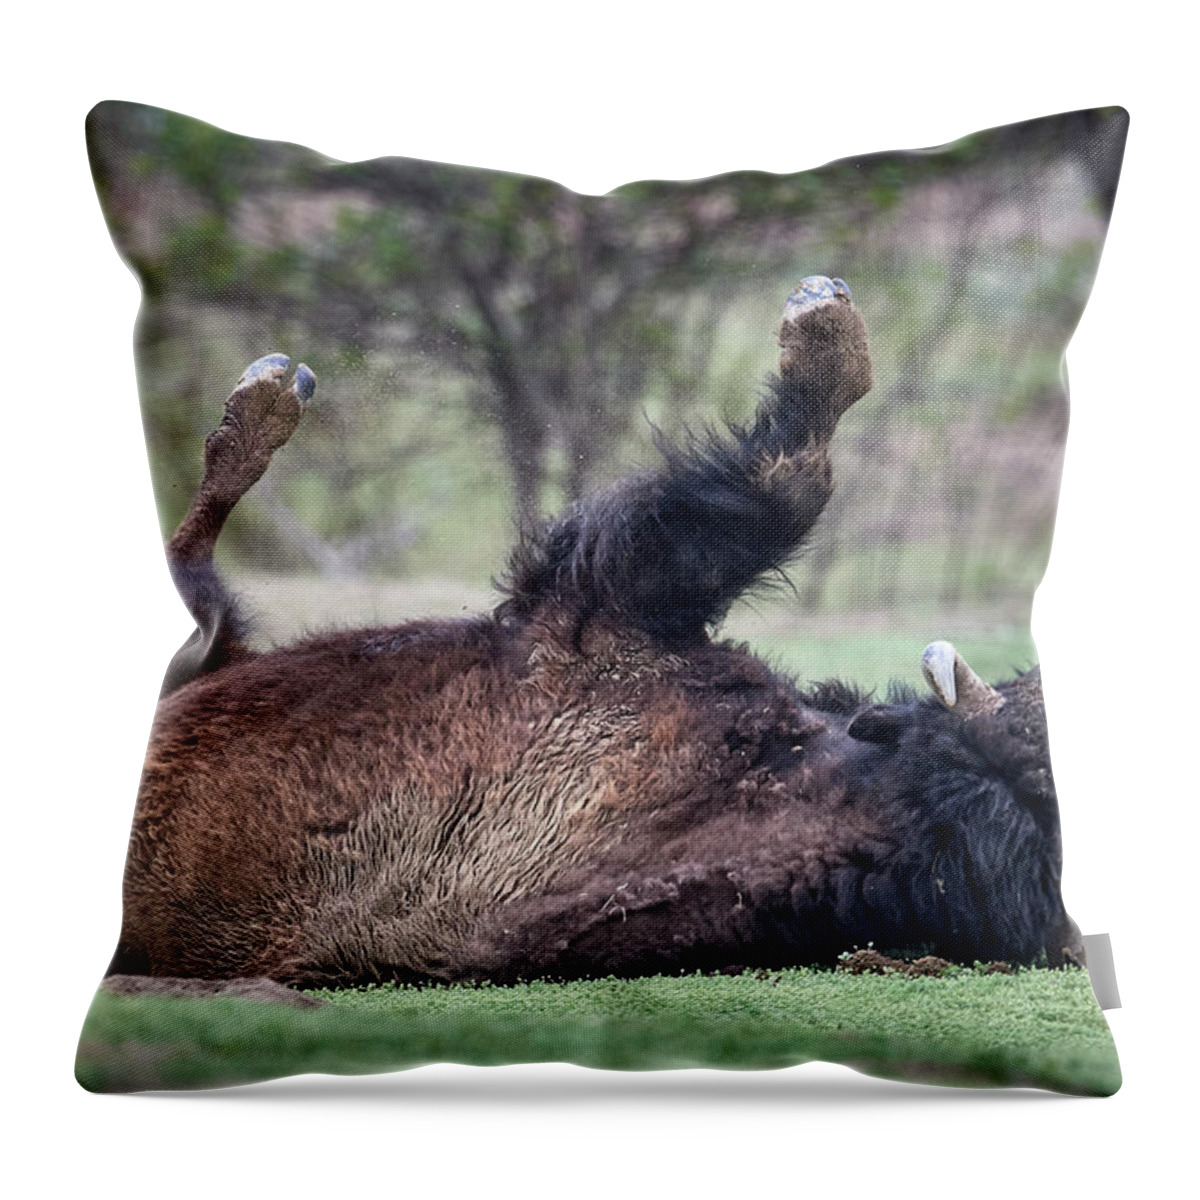 Mammal Throw Pillow featuring the photograph Playing Dead by Paul Freidlund